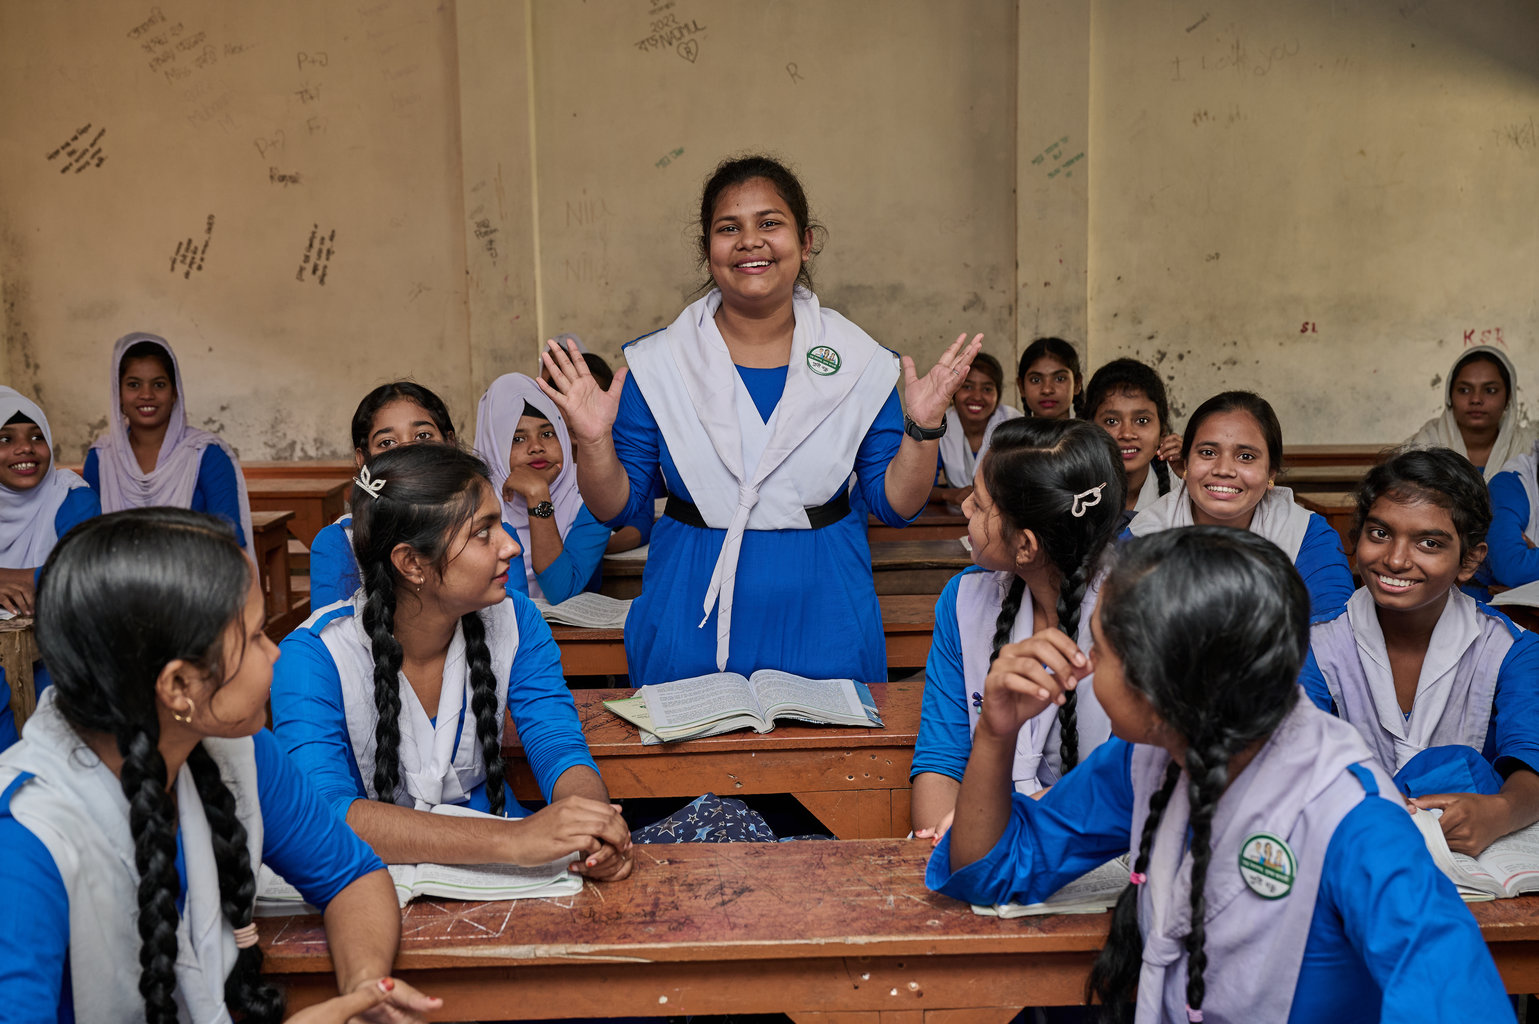 A girl stands up in the middle of the classroom. Her classmates are all turned and looking at her as she smiles and has her hands raised during a talk.